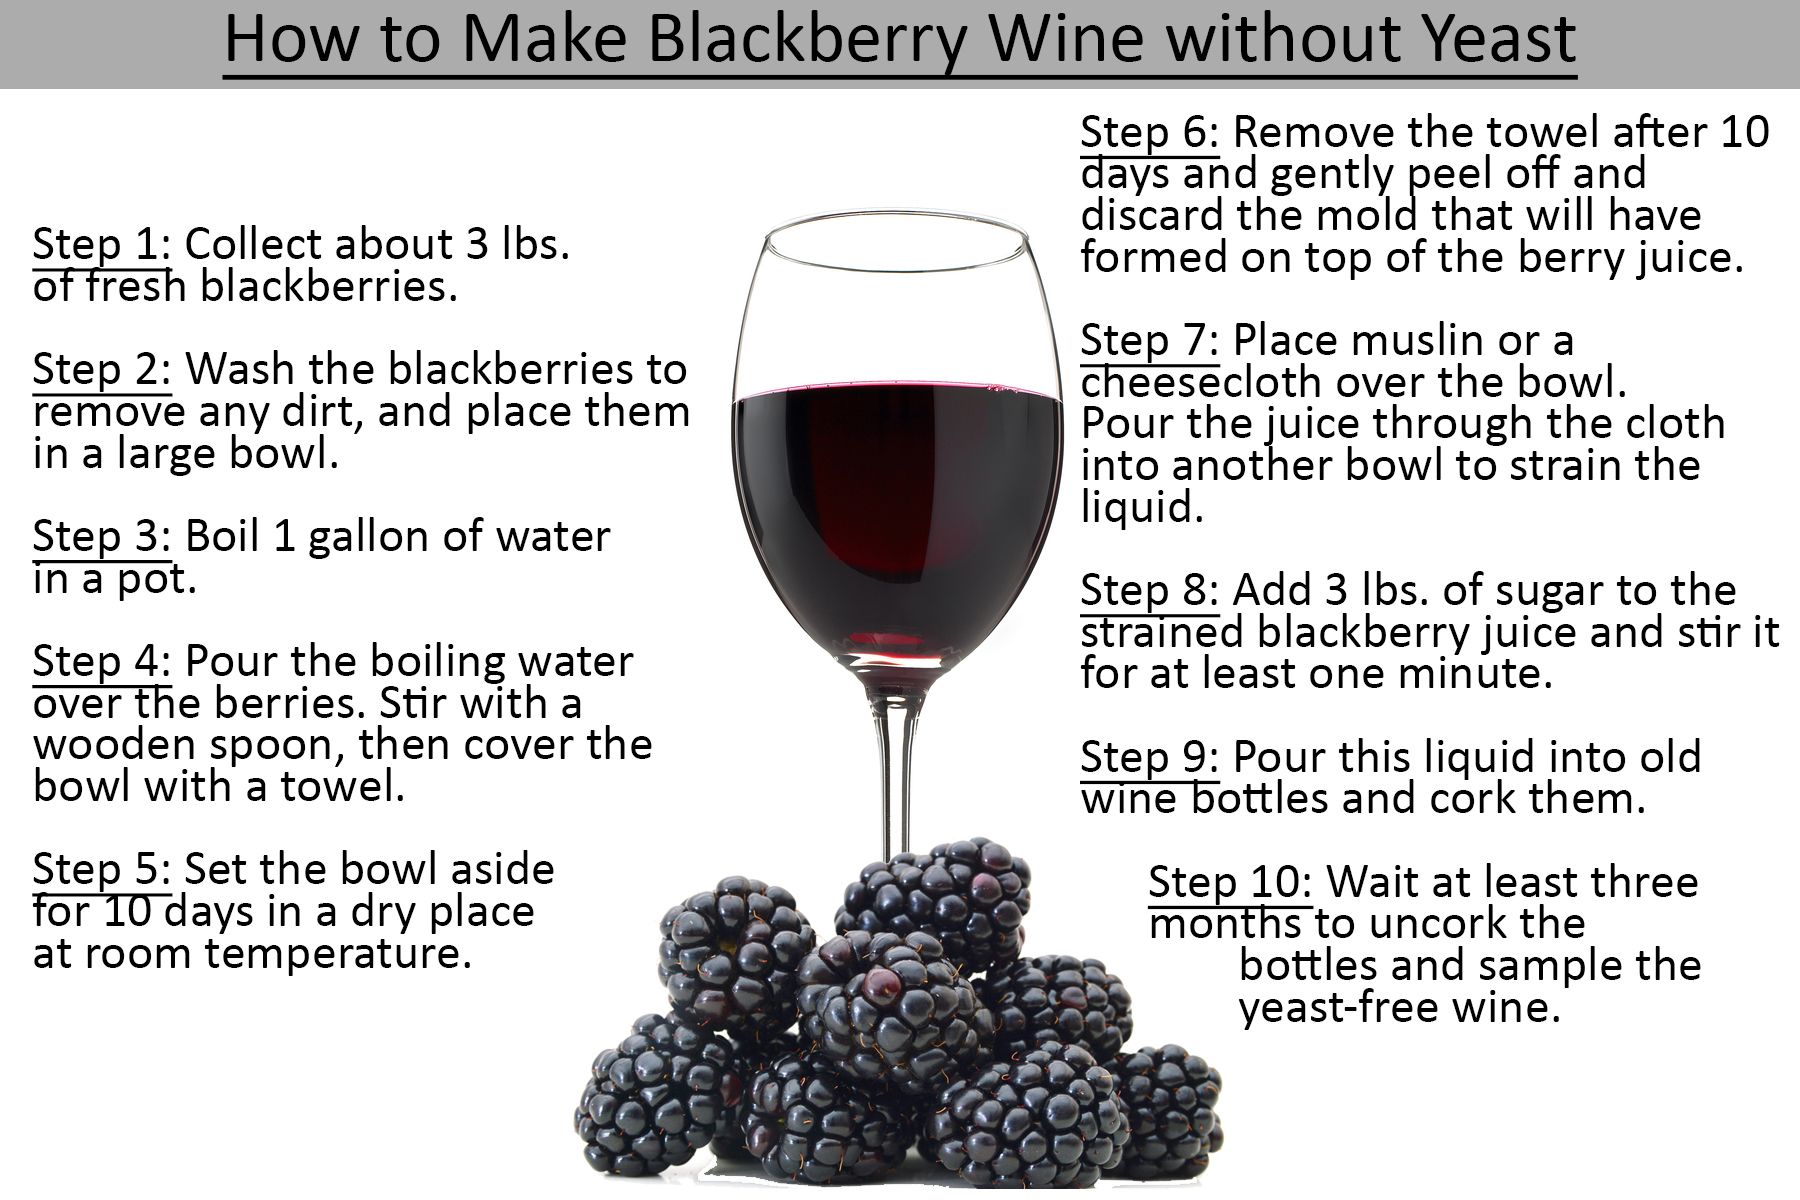 How to Make Blackberry Wine without Yeast